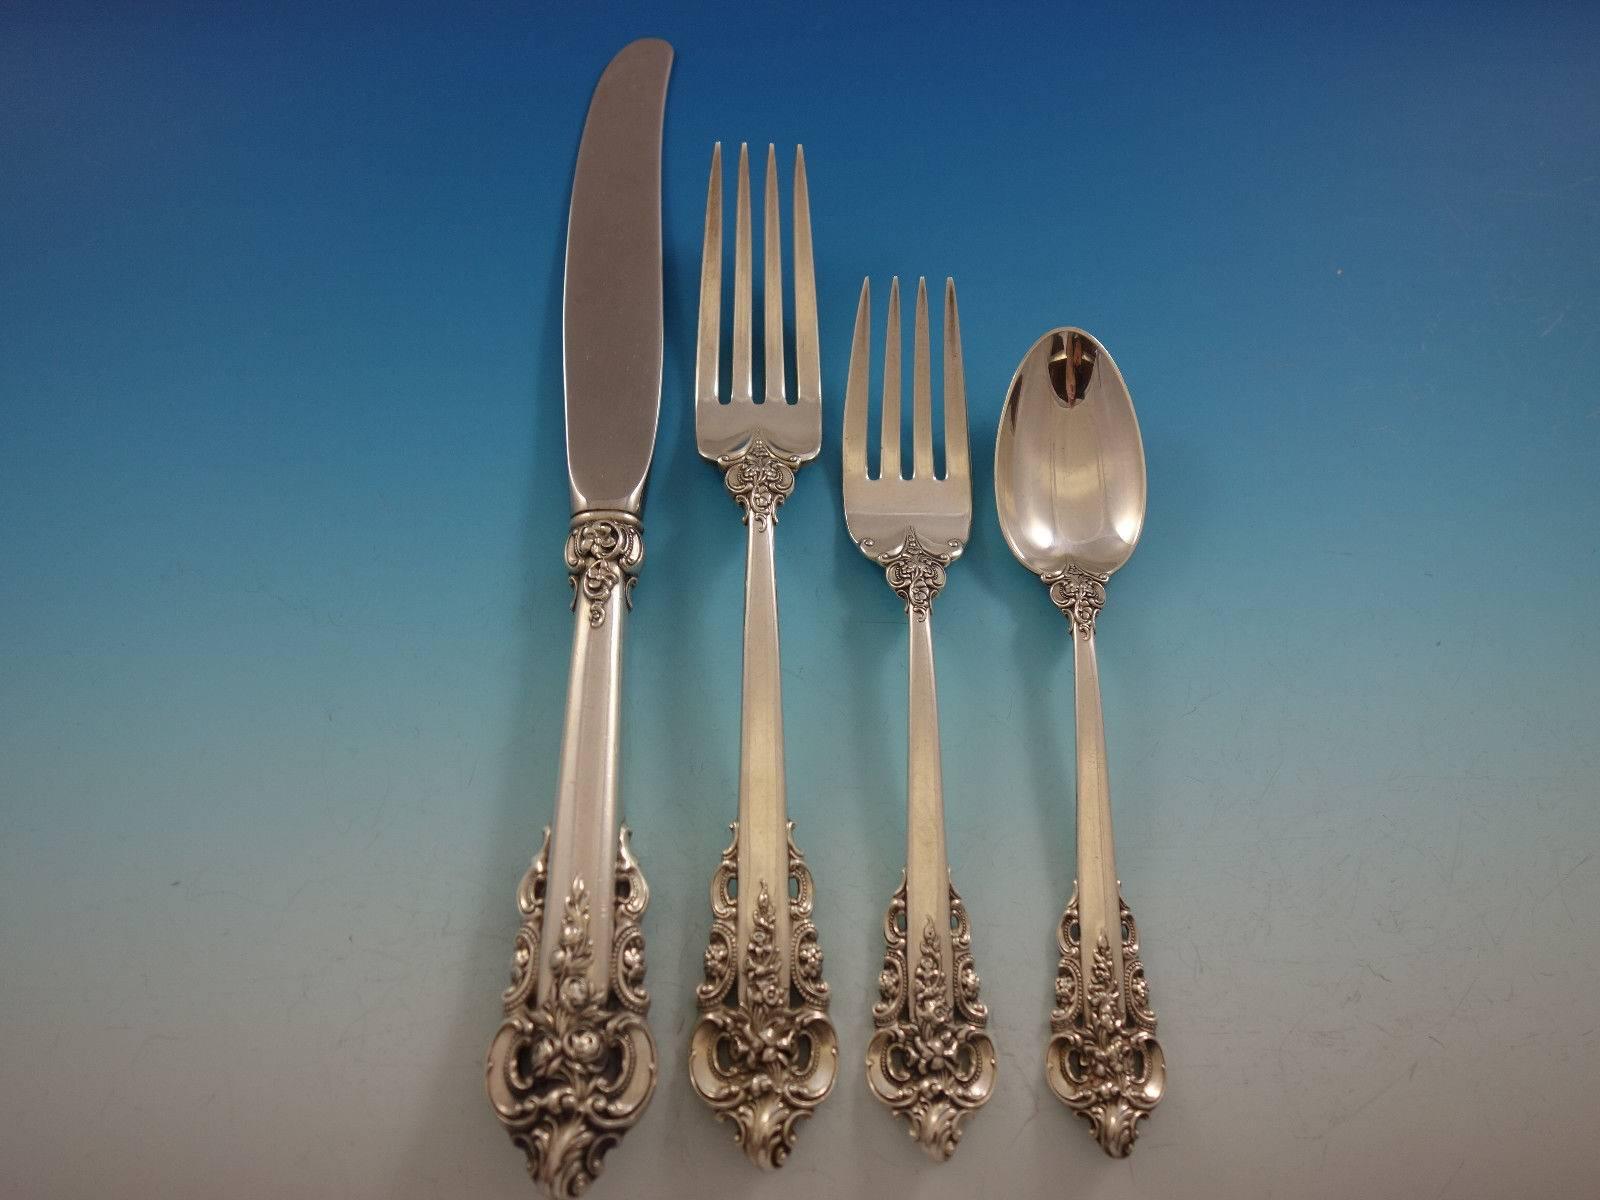 Dinner Size Grande Baroque by Wallace sterling silver Flatware set - 145 pieces. This set includes: 

12 Dinner Size Knives, 9 3/4